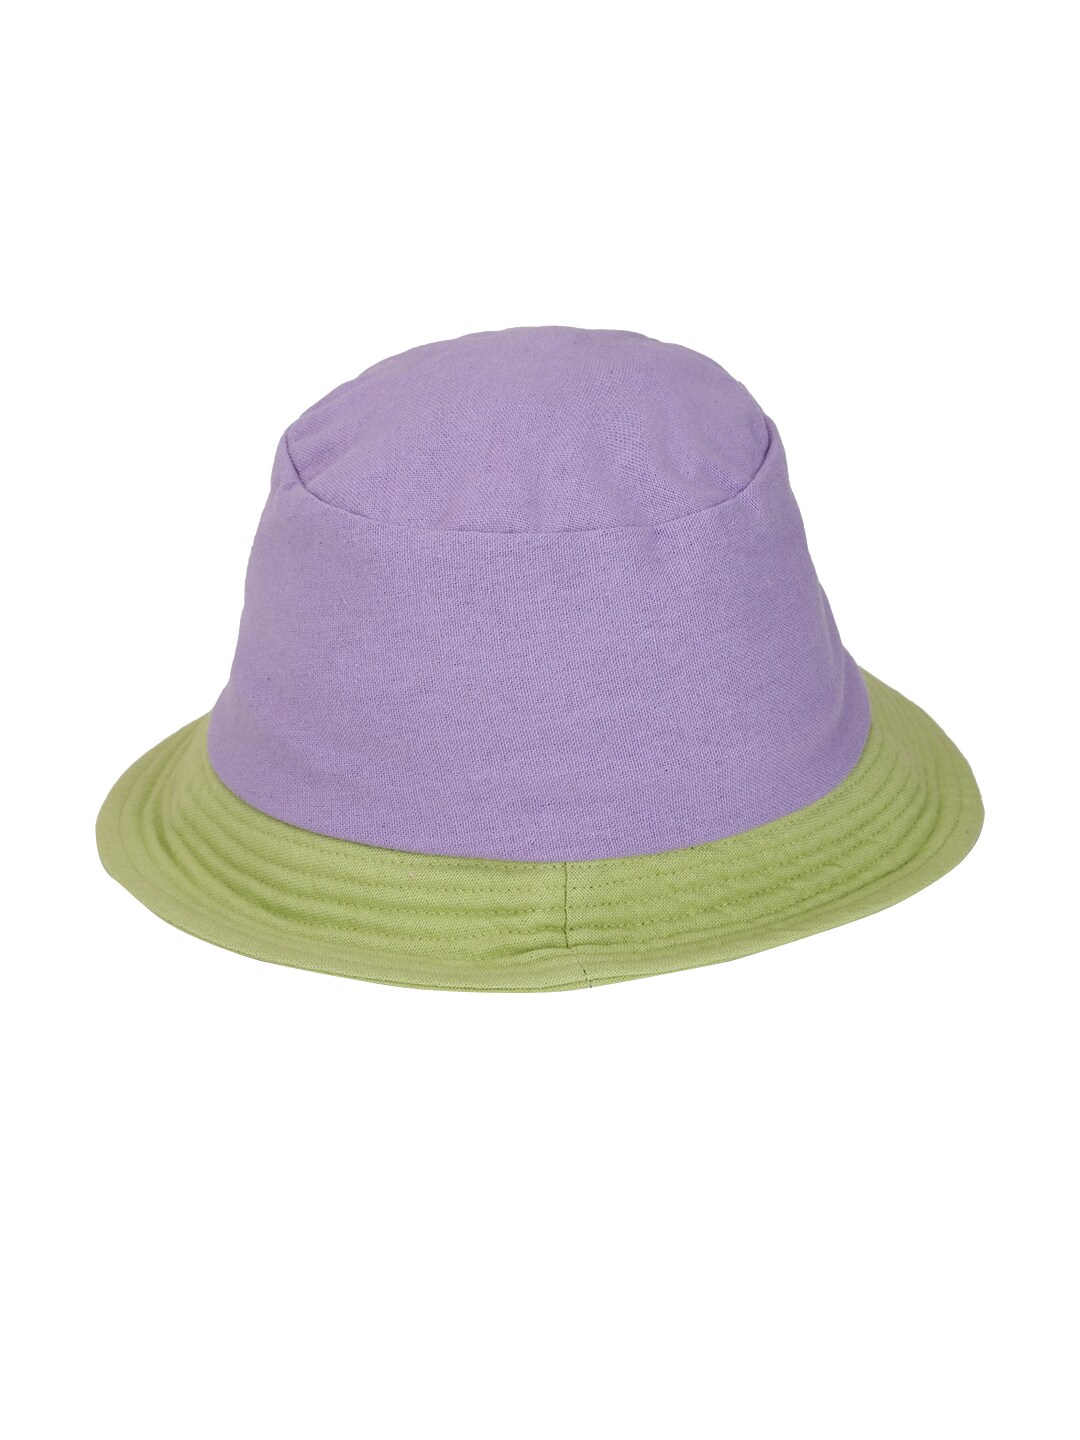 FOREVER 21 Women Purple & Green Solid Pure Cotton Bucket Hat Price in India